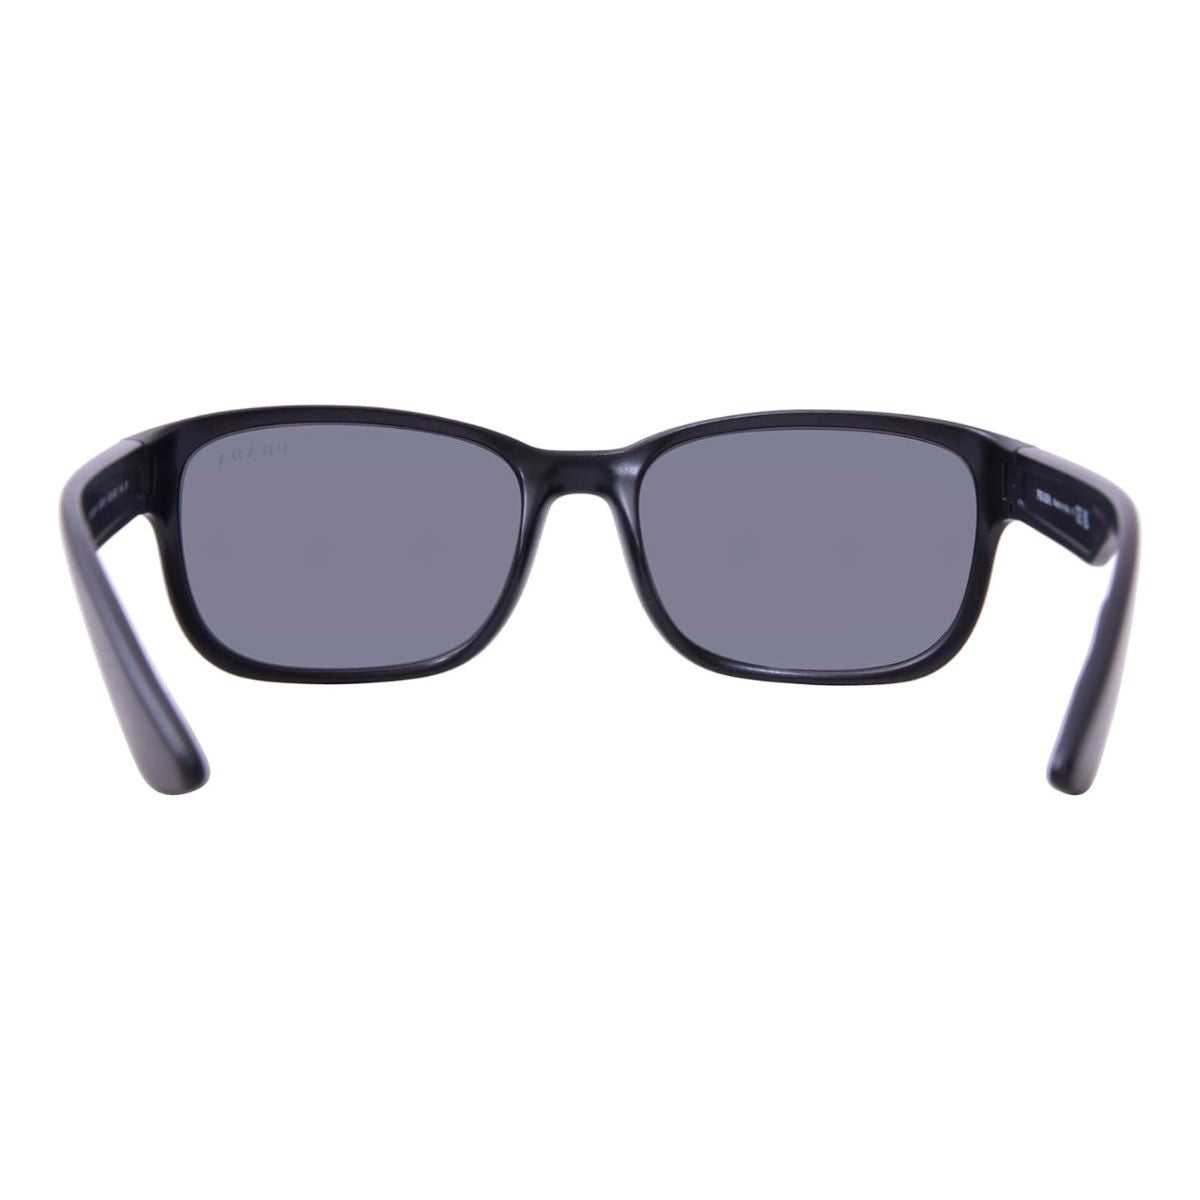 "Prada SpS05V 1BO-5S0 sunglasses offer men a stylish accessory with their square grey frame. Shop now at Optorium for the best sunglasses and elevate your style."